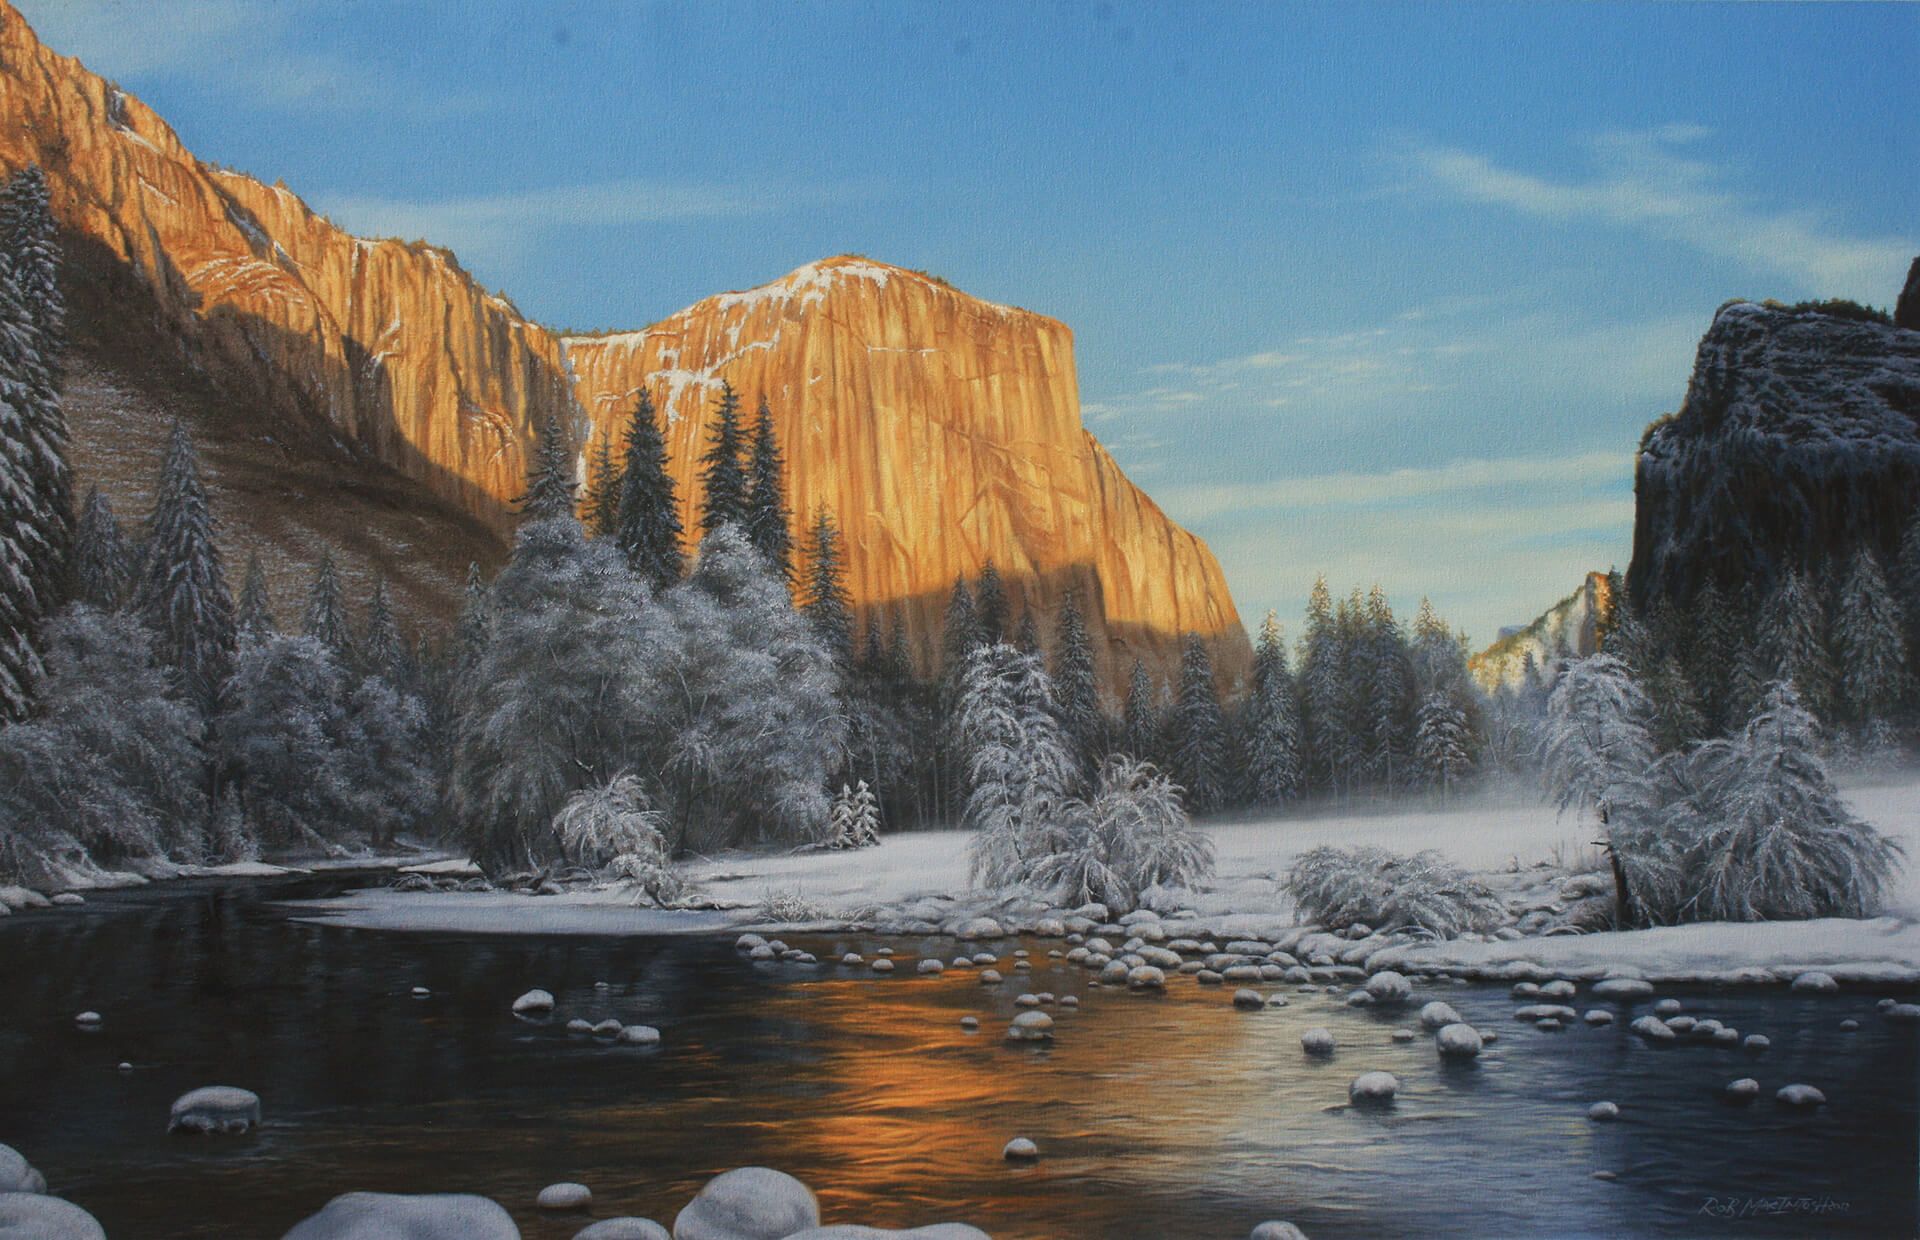 Photorealistic painting of a river flowing through snowed over mountains